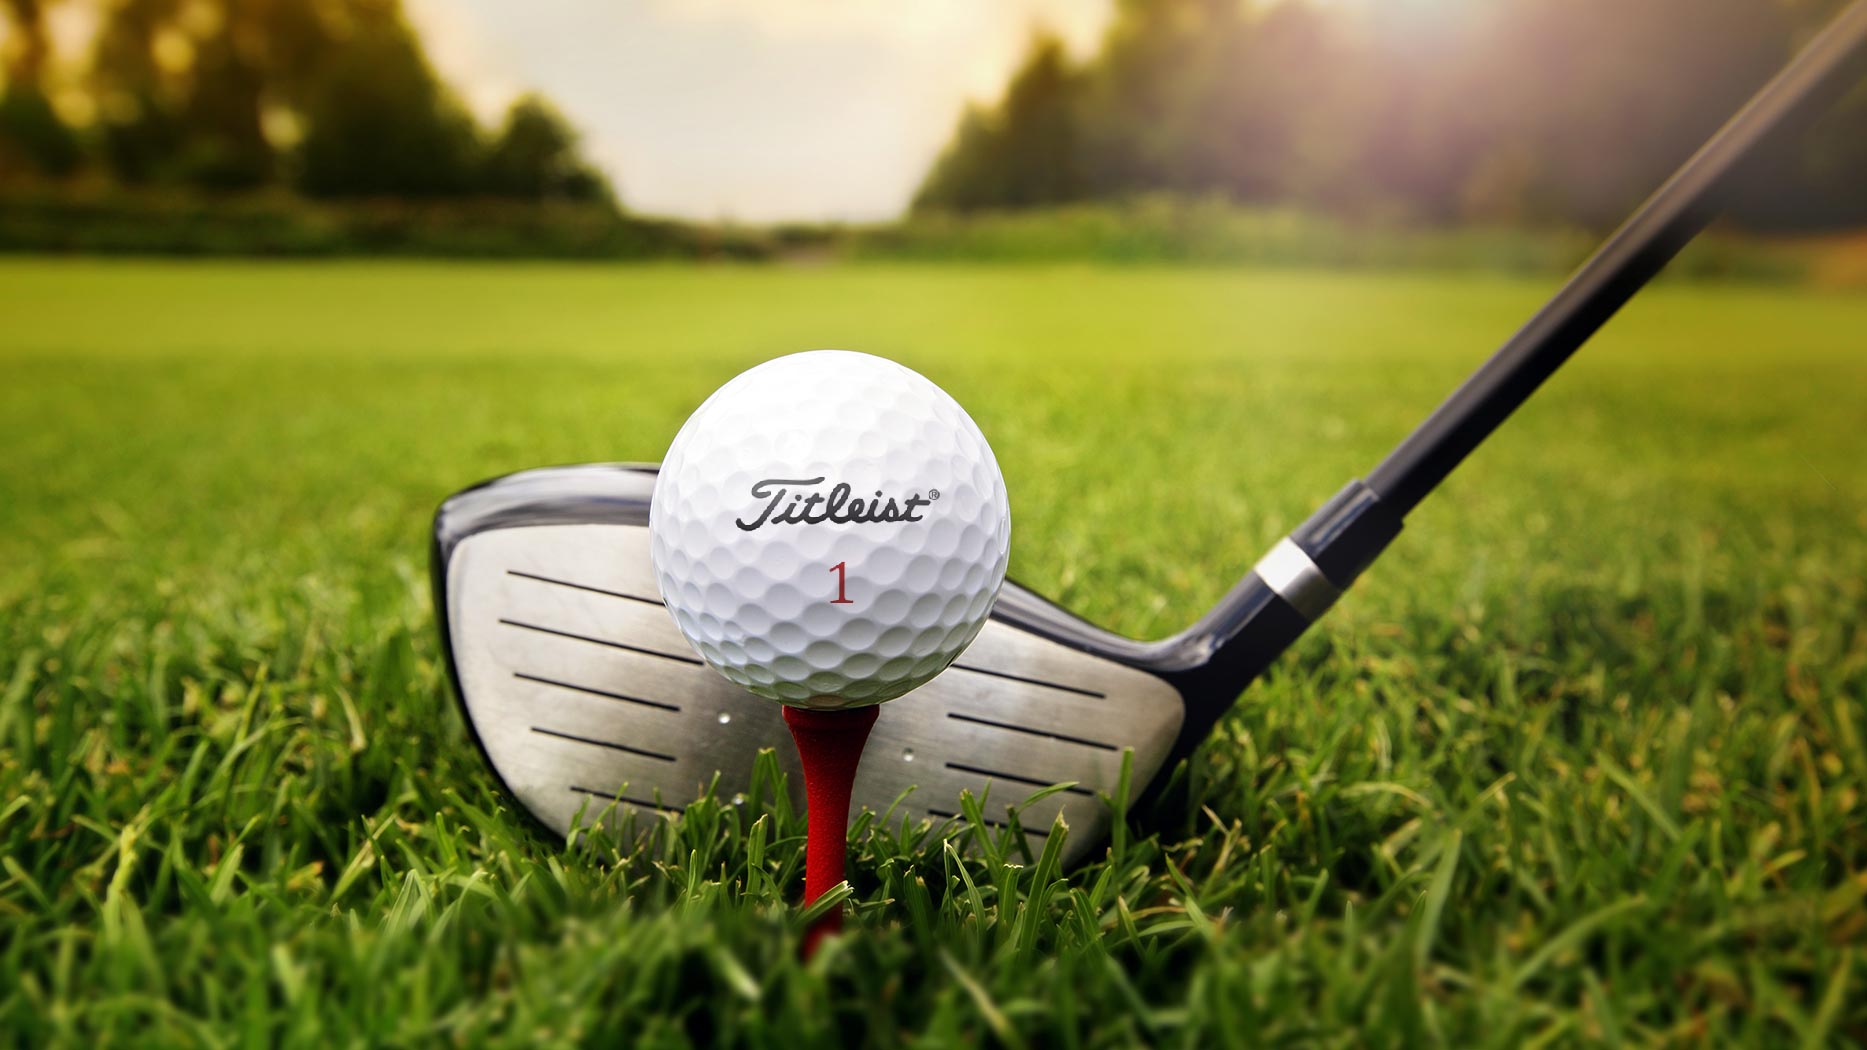 Image of the Titleist website